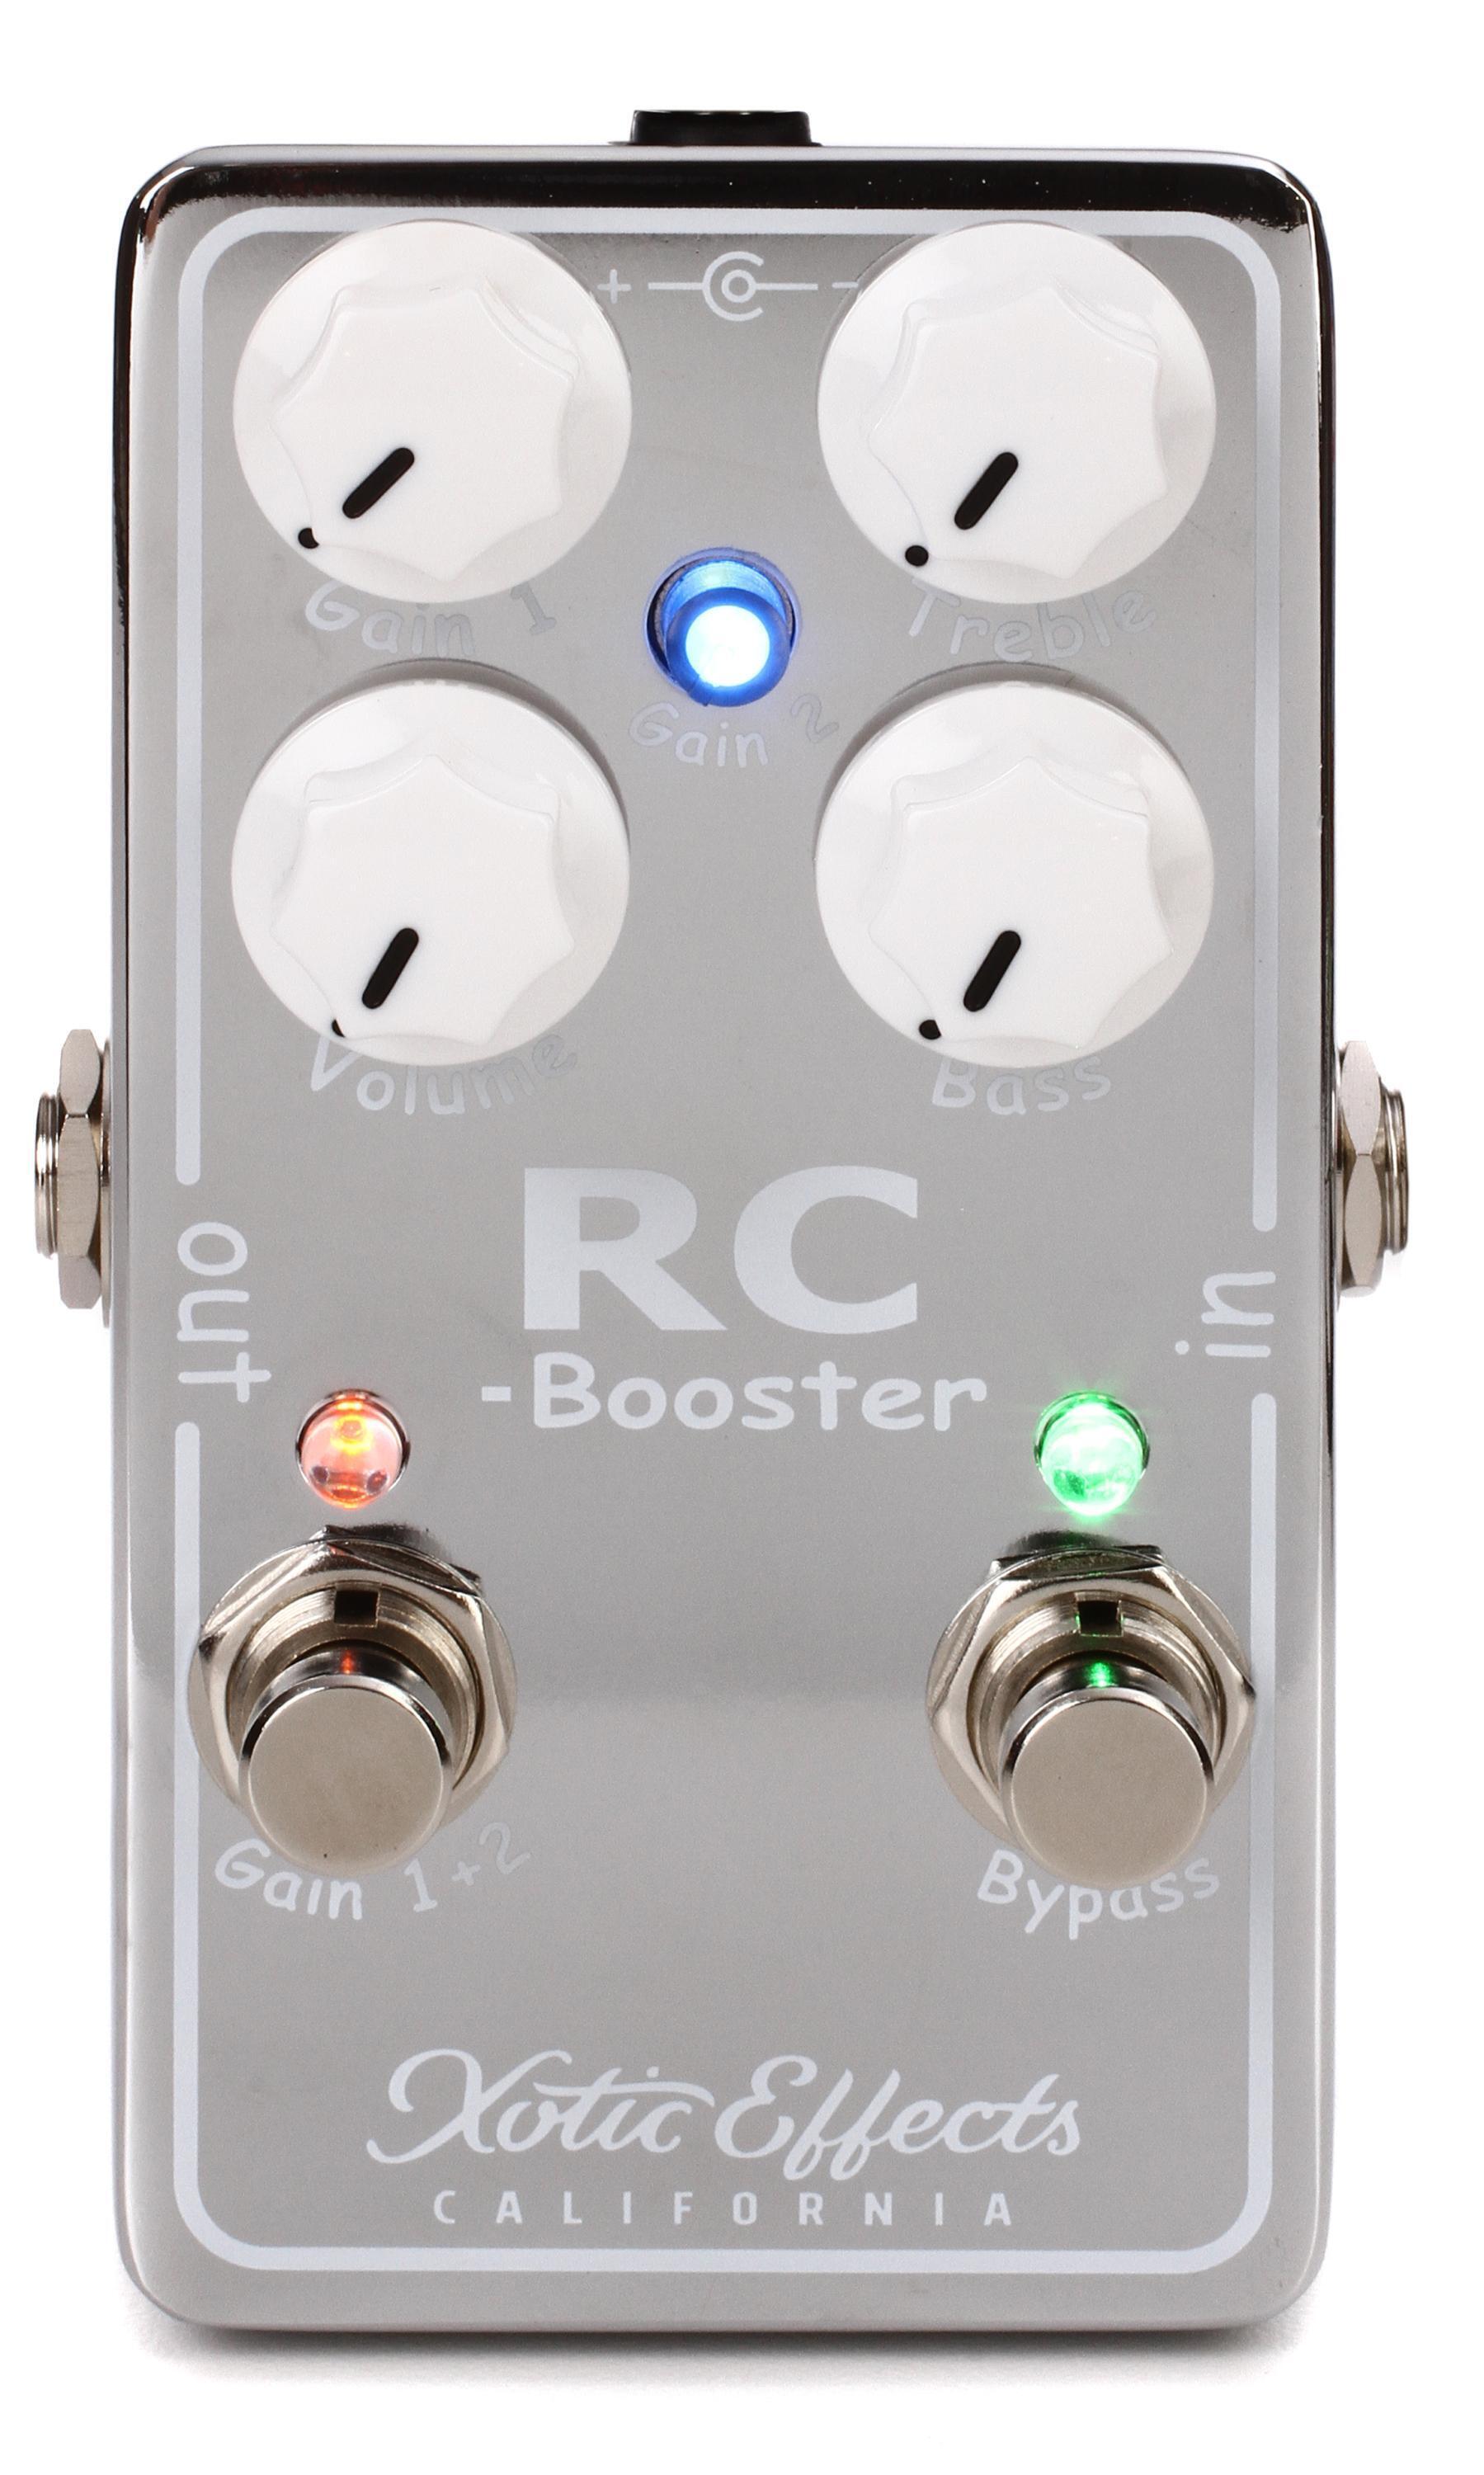 Xotic RC Booster-V2 Pedal